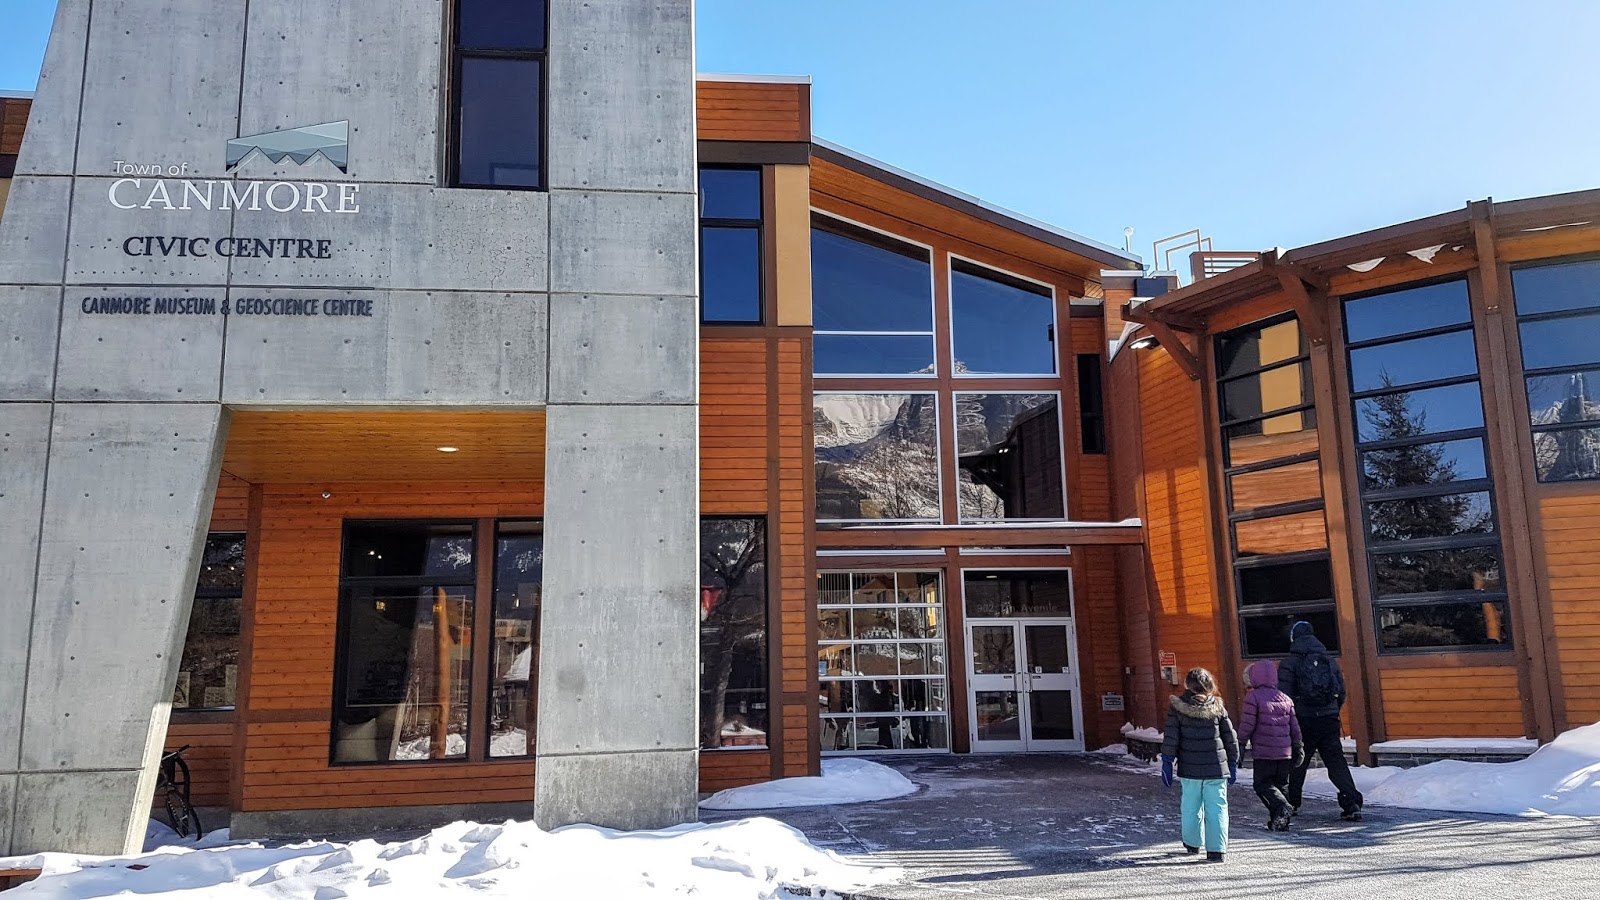 Canmore Museum and Geoscience Centre